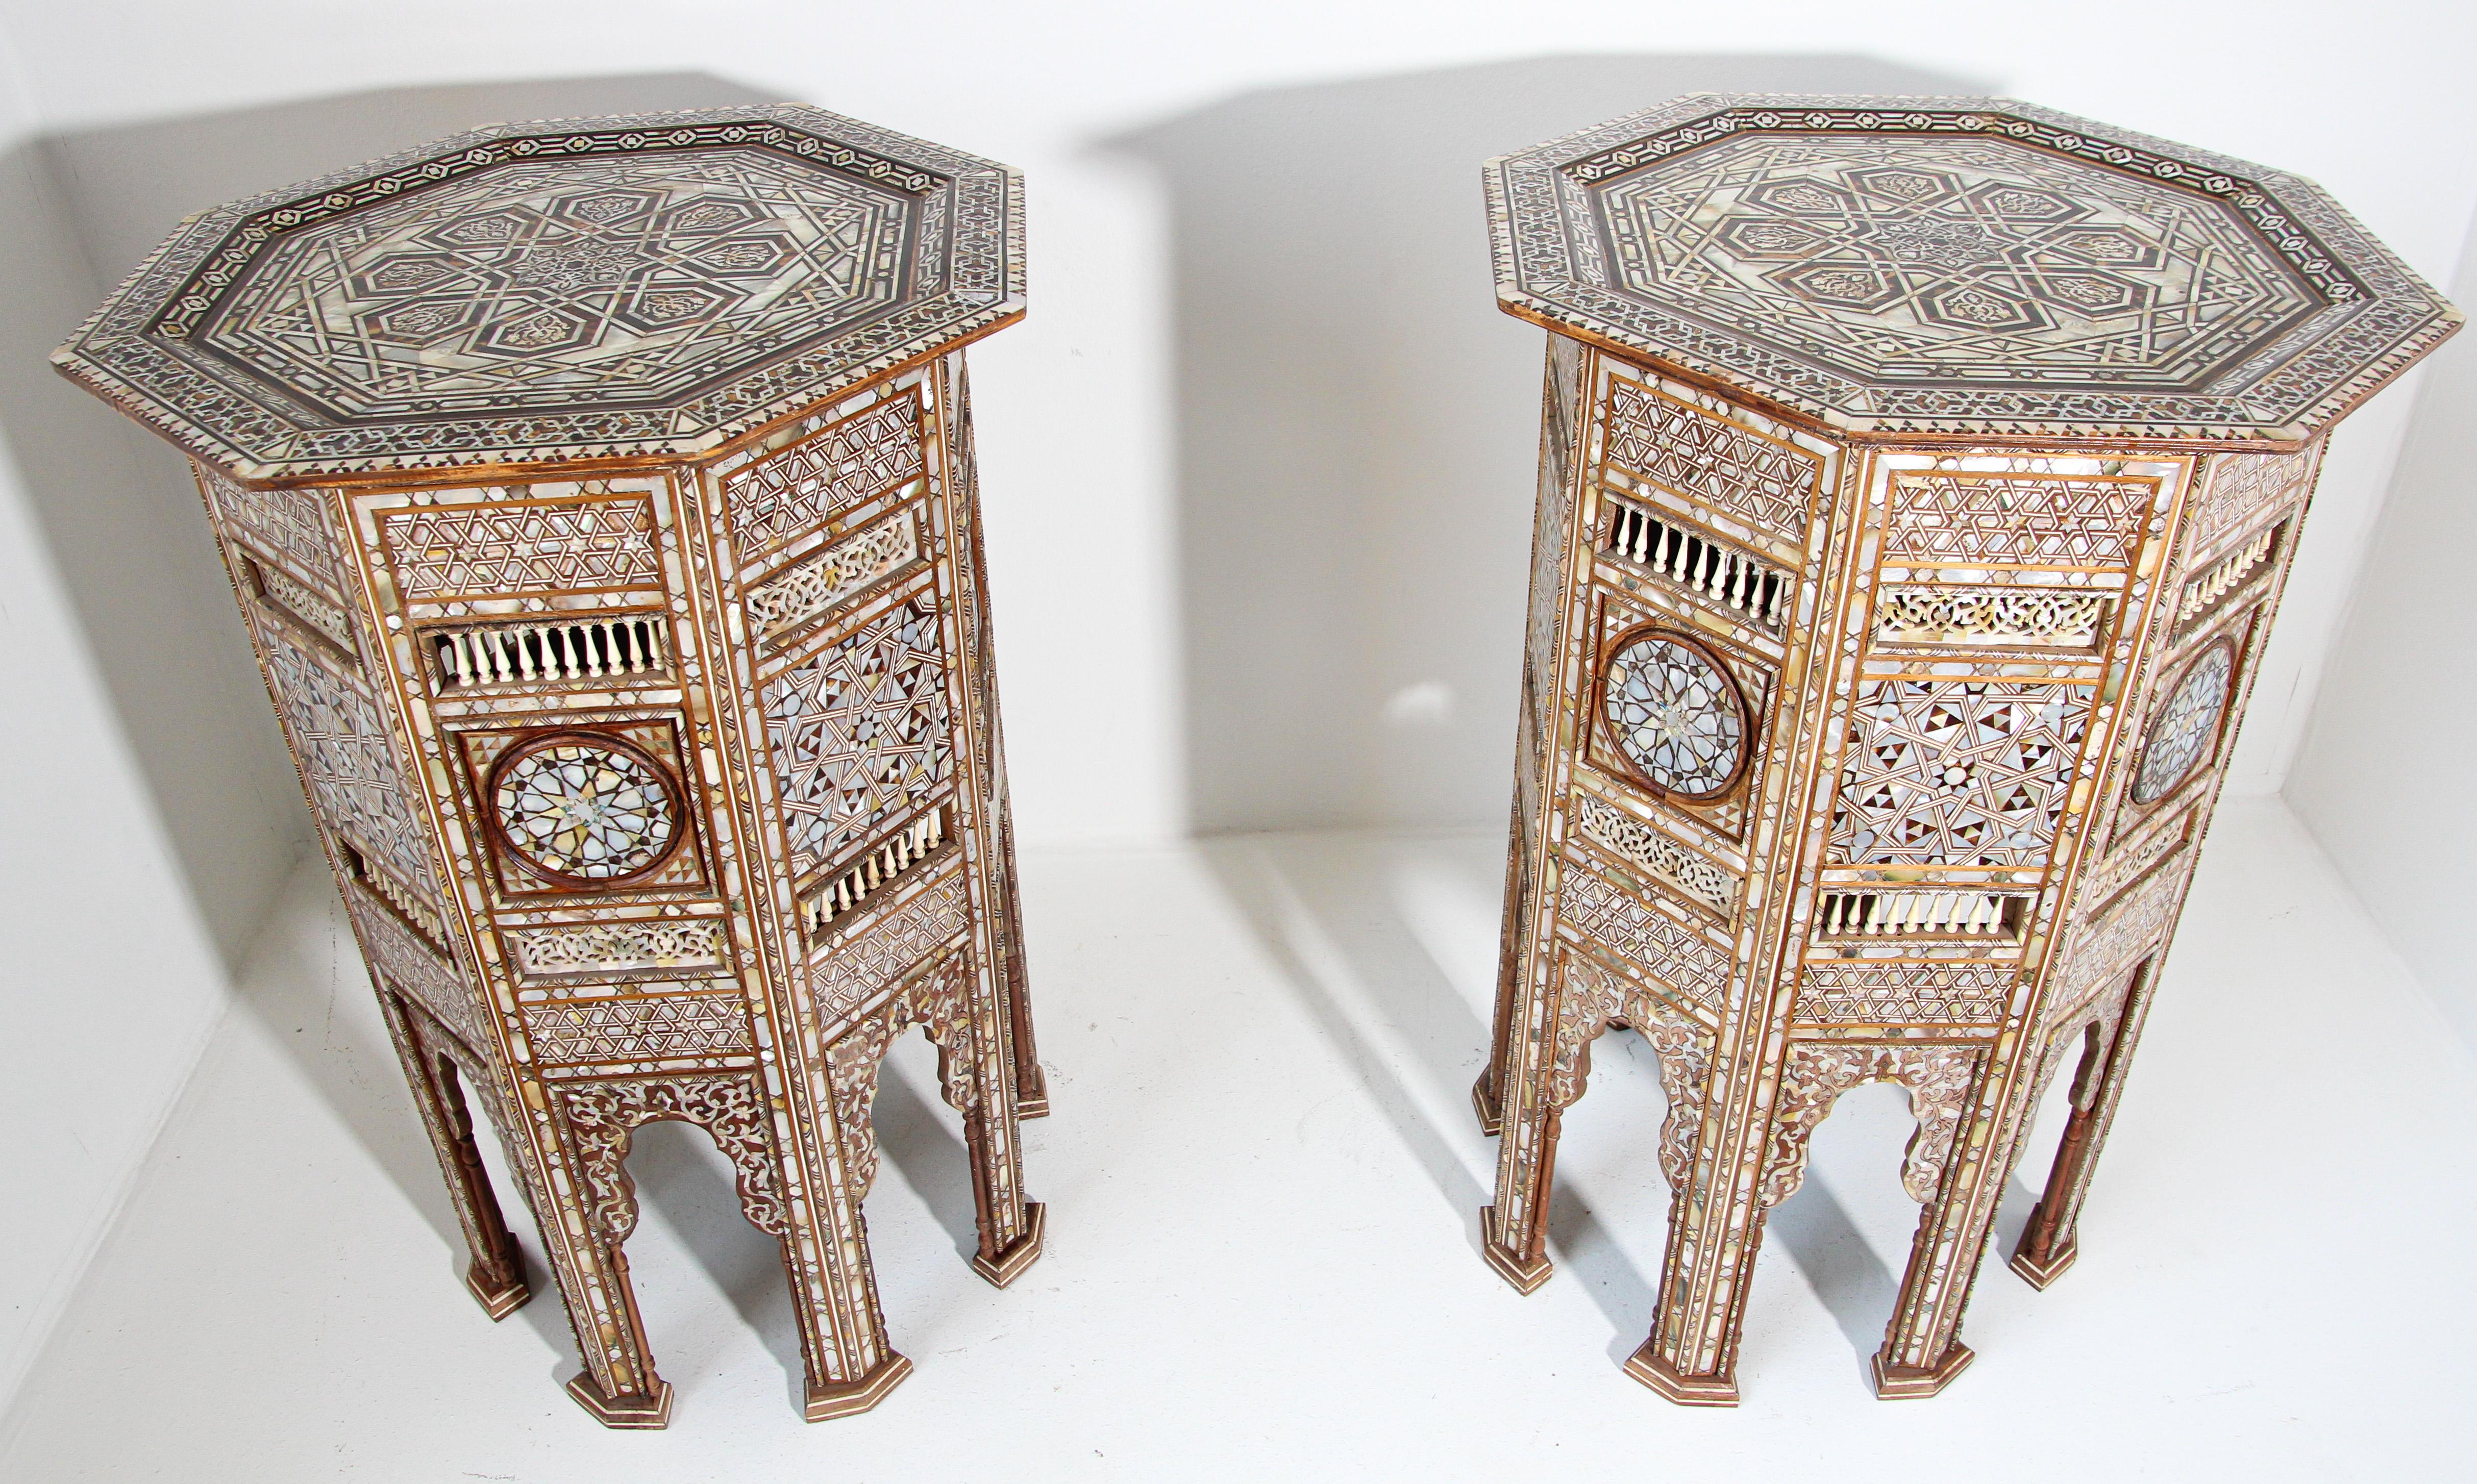 Pair of Moorish Middle Eastern pedestal tables inlaid.
Pair of large antique 19th century Middle Eastern Moorish style mosaic inlay tables.
Outstanding very rare to find pair of Ottoman Turkish pedestal tables inlaid.
Very fine Islamic